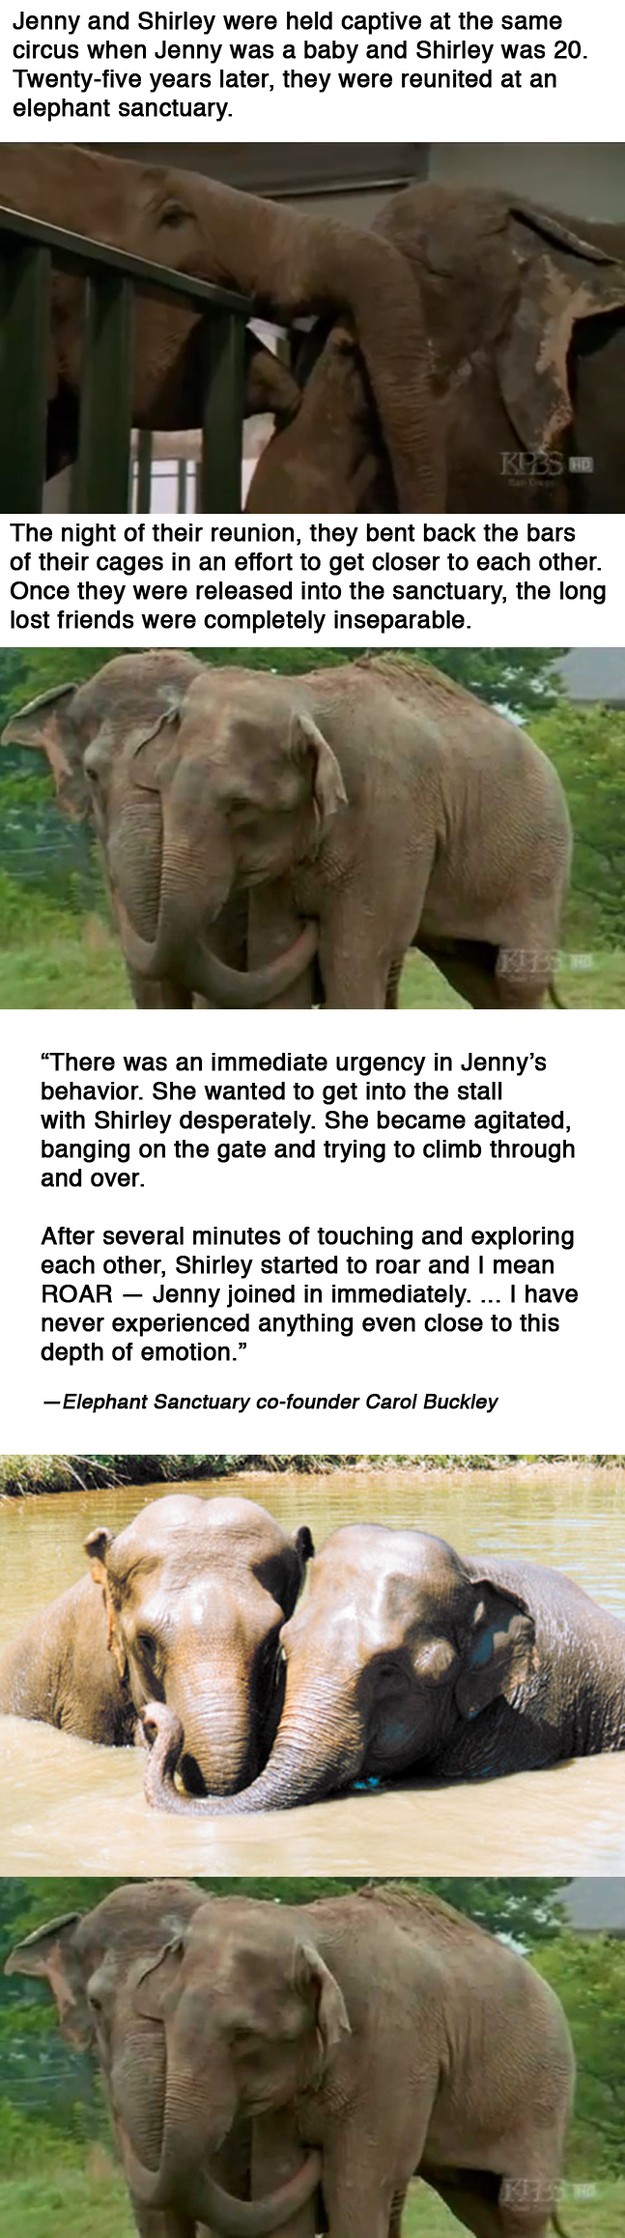 An amazing reunion of two abused circus elephants after 25 years being apart.